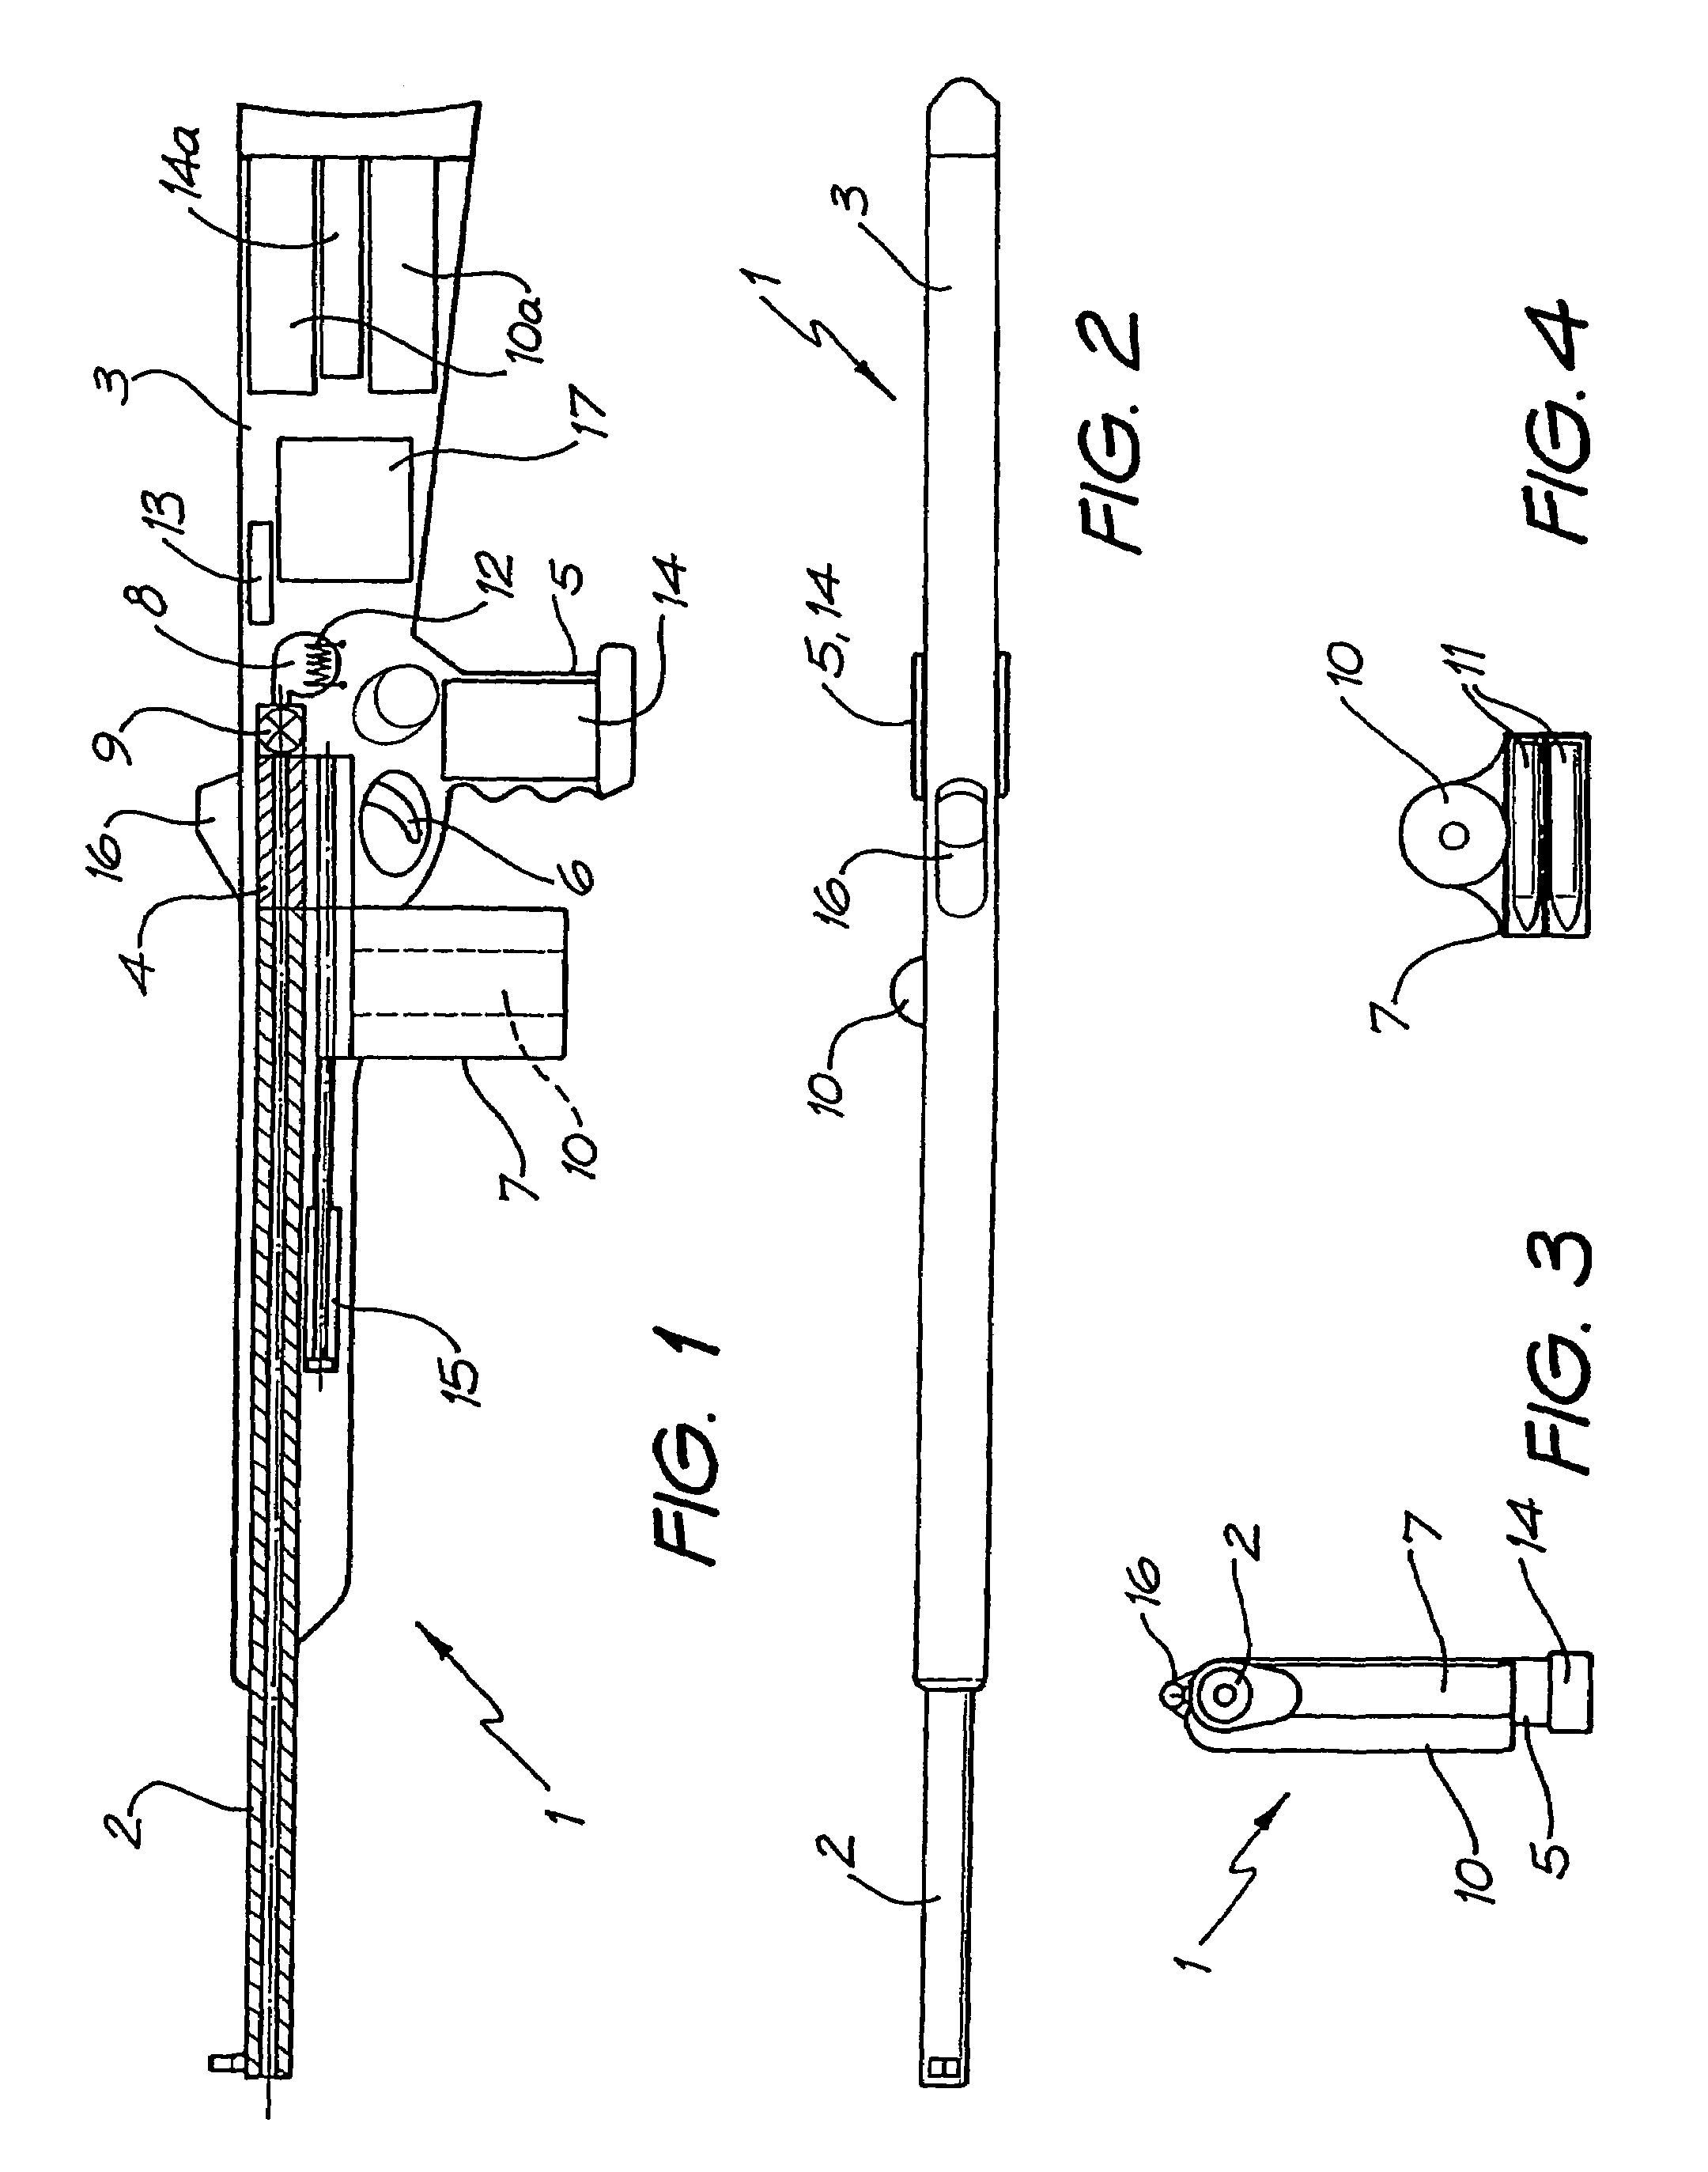 Projectile firing device using liquified gas propellant